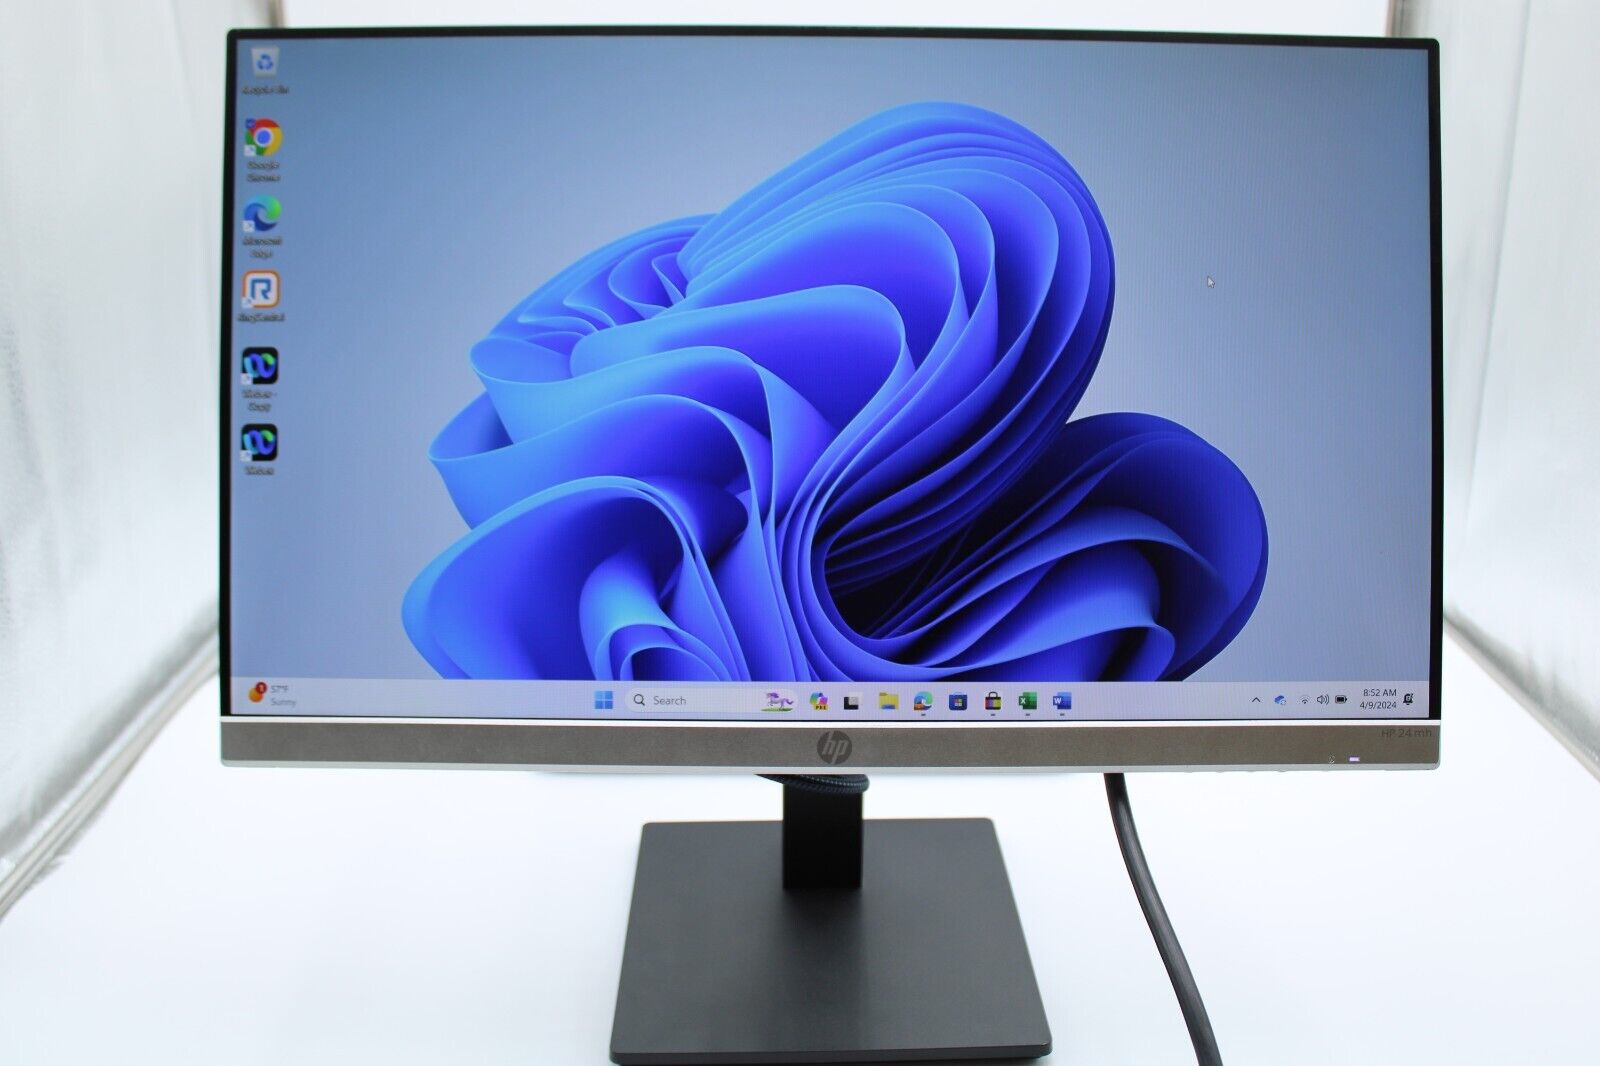 HP 24mh 23.8 inch 1080p Widescreen IPS LED Monitor - 1D0J9AA